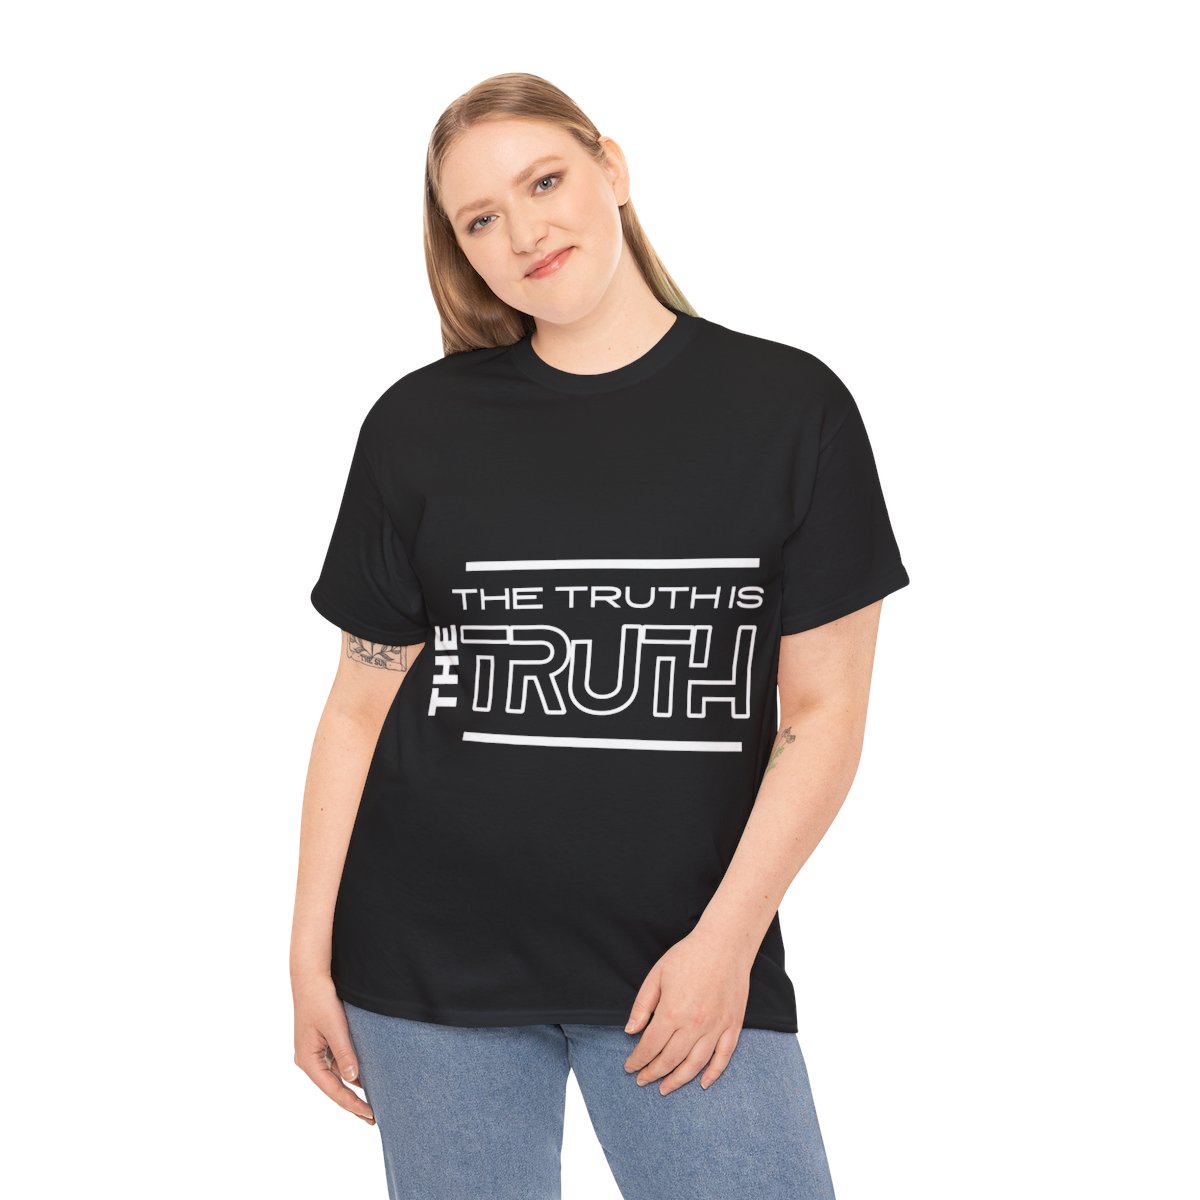 THE TRUTH T-SHIRT product thumbnail image